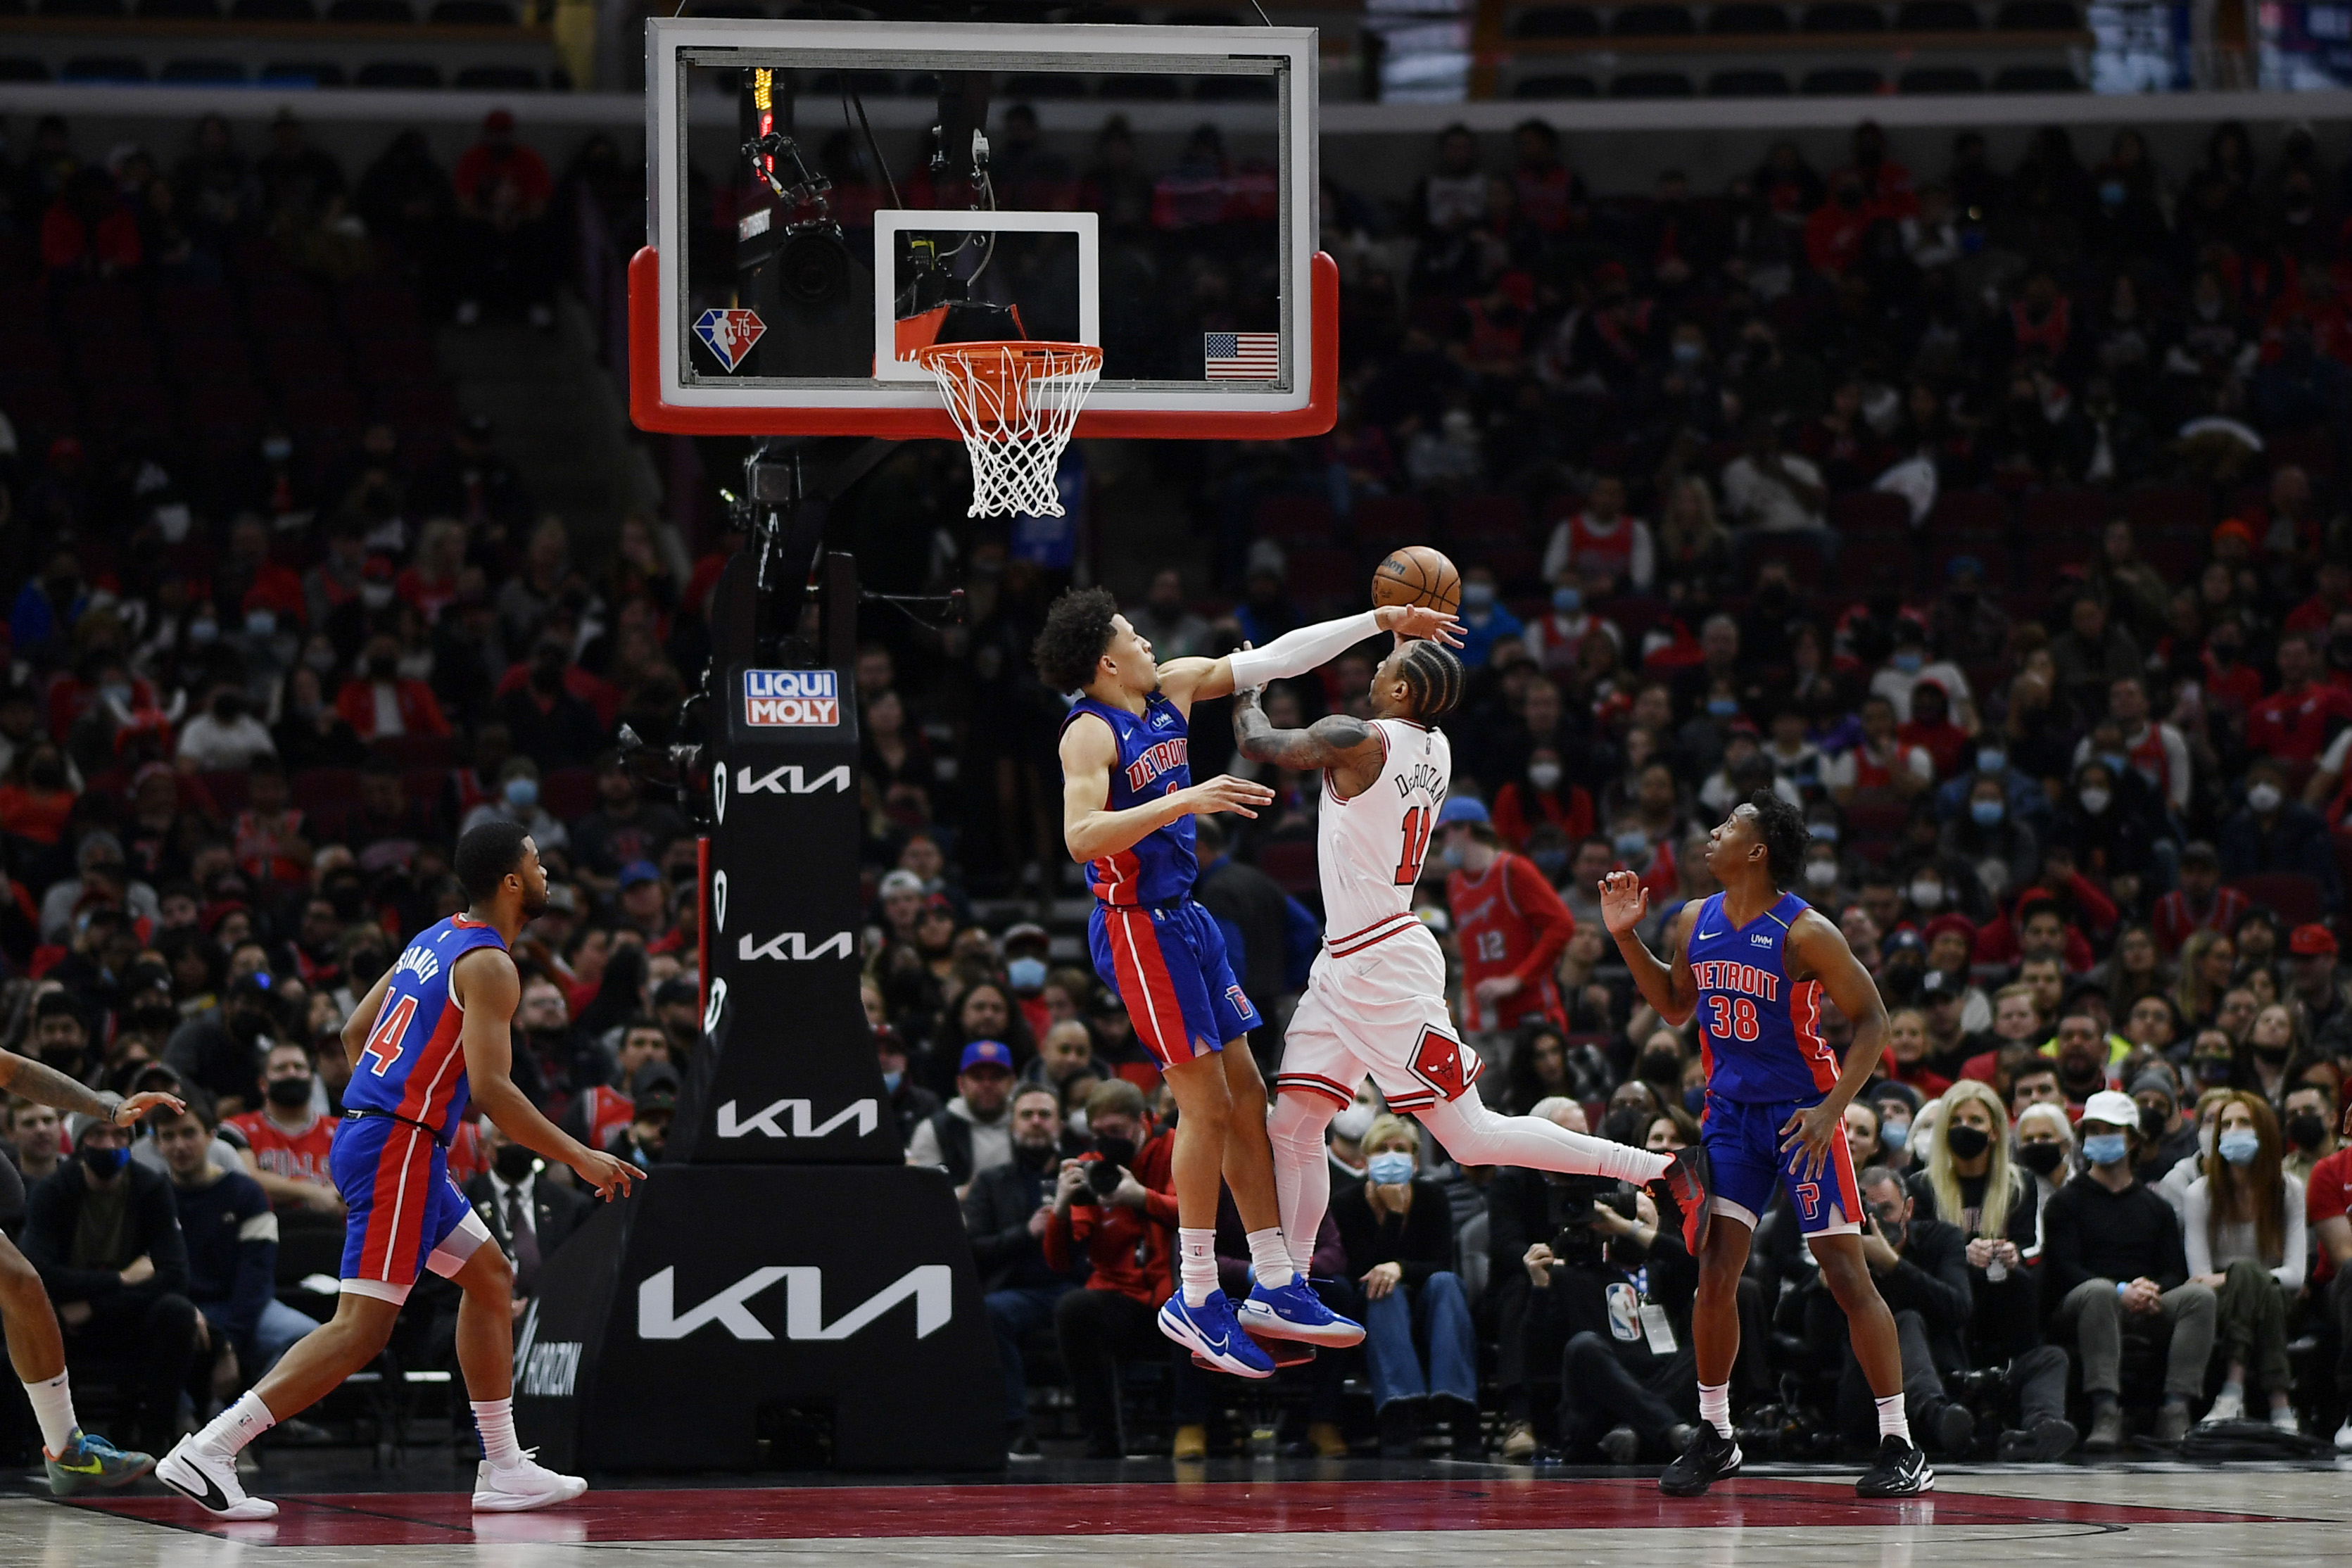 Detroit Pistons take on Chicago Bulls in Paris this afternoon